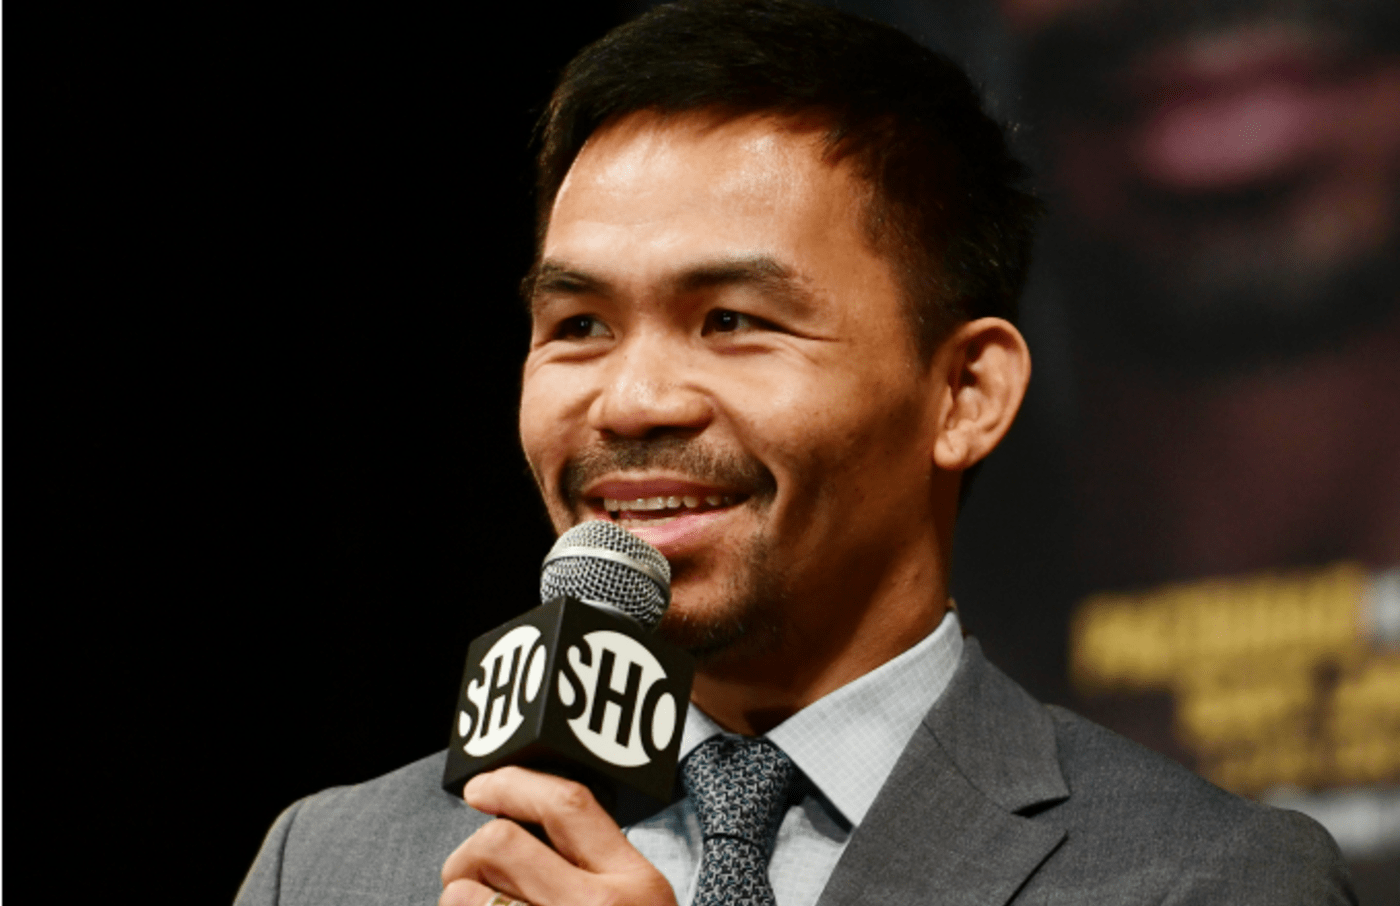 Manny Pacquiao smiles during a press conference at Gotham Hall